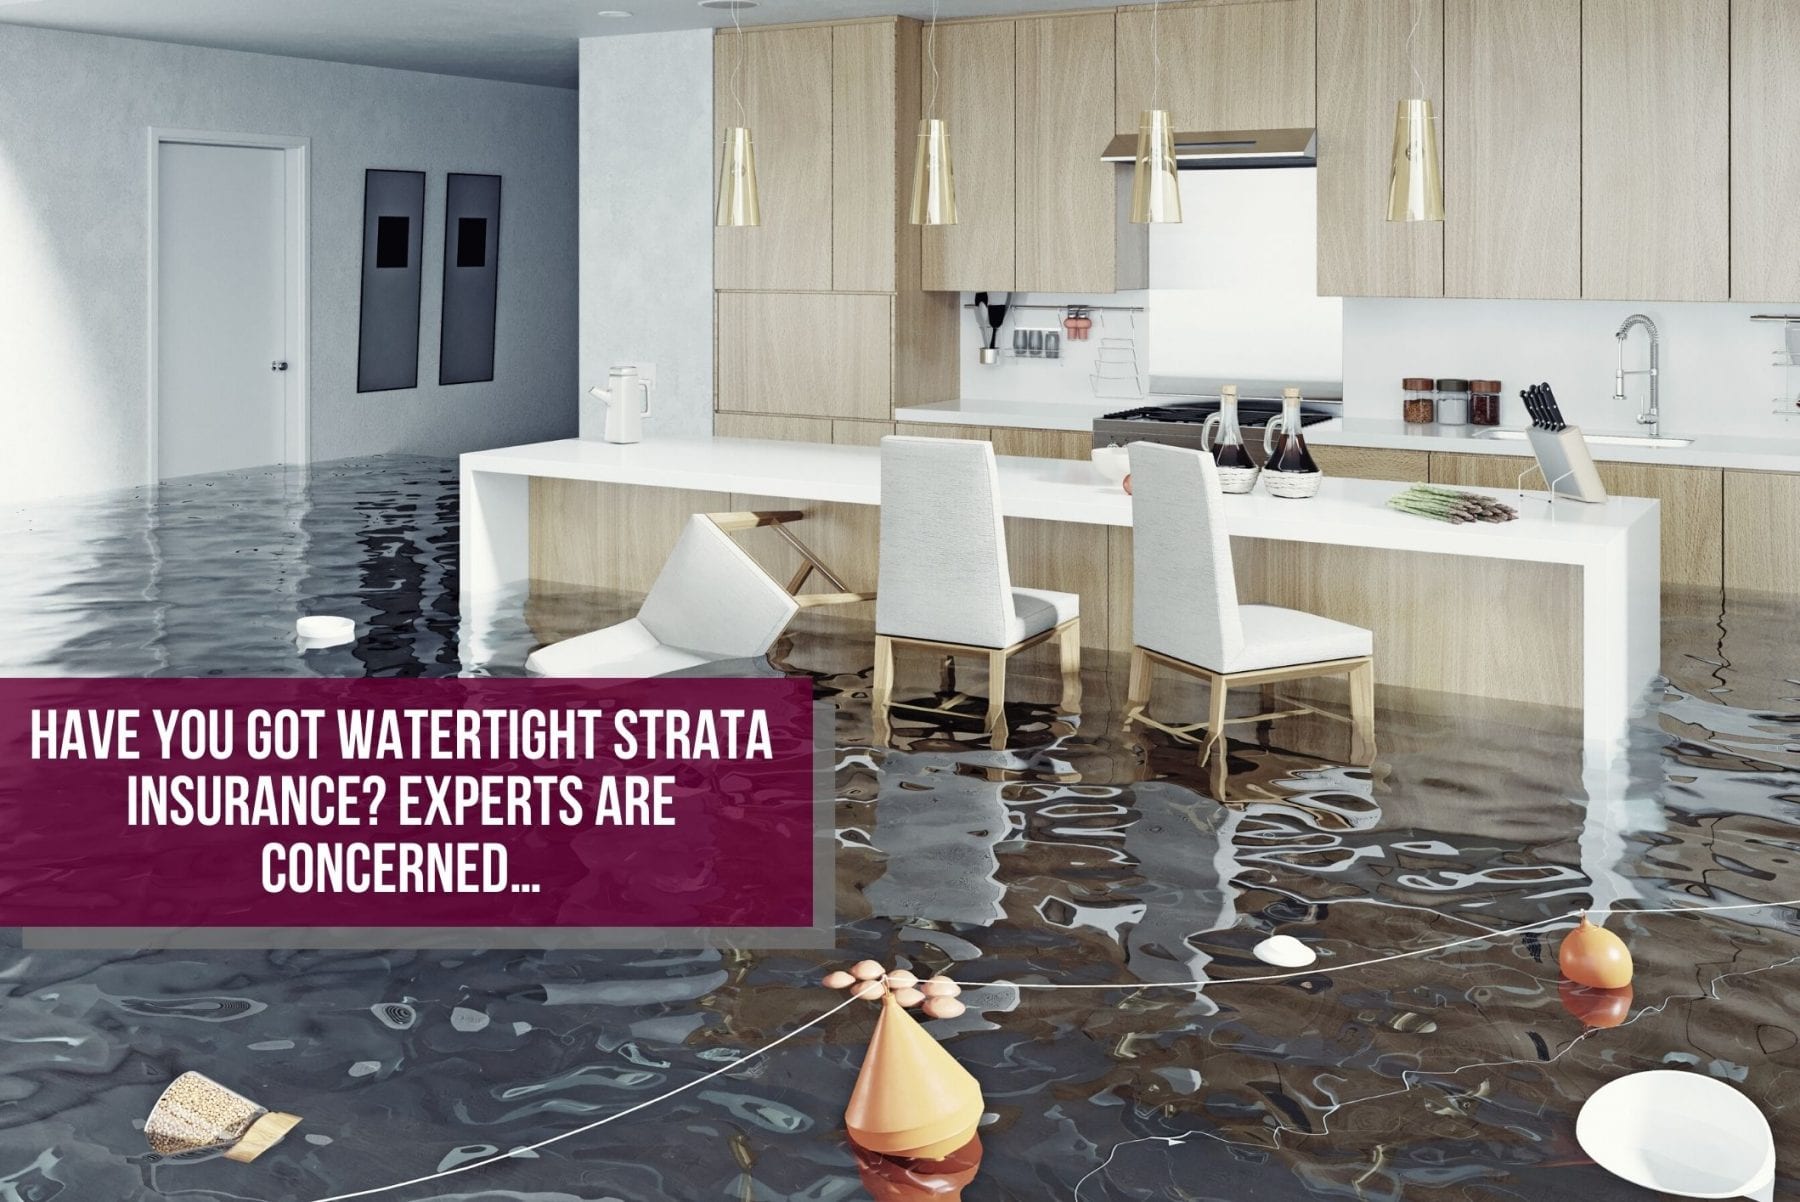 Water damage in strata property